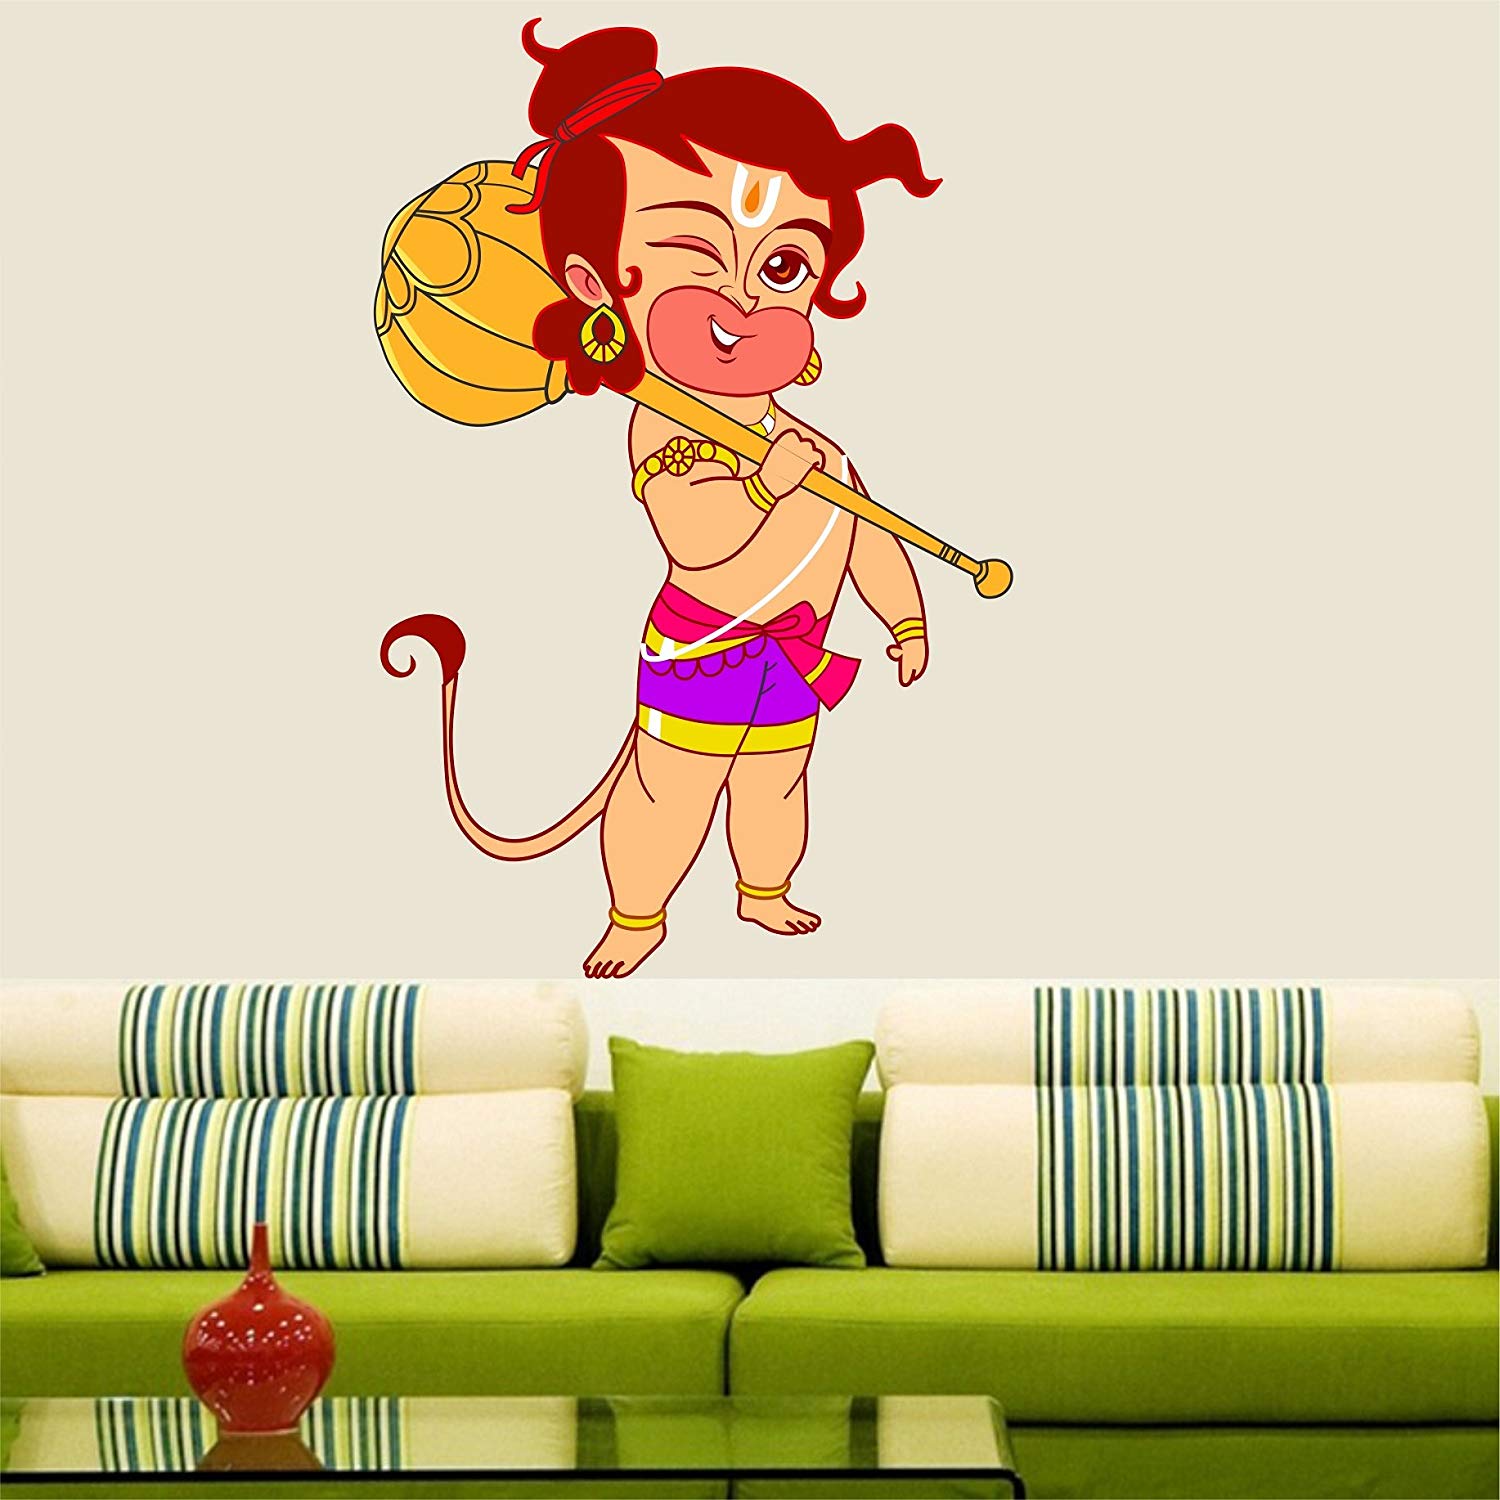 Buy Asmi Collections Wall Stickers Baal Hanuman Online At Low